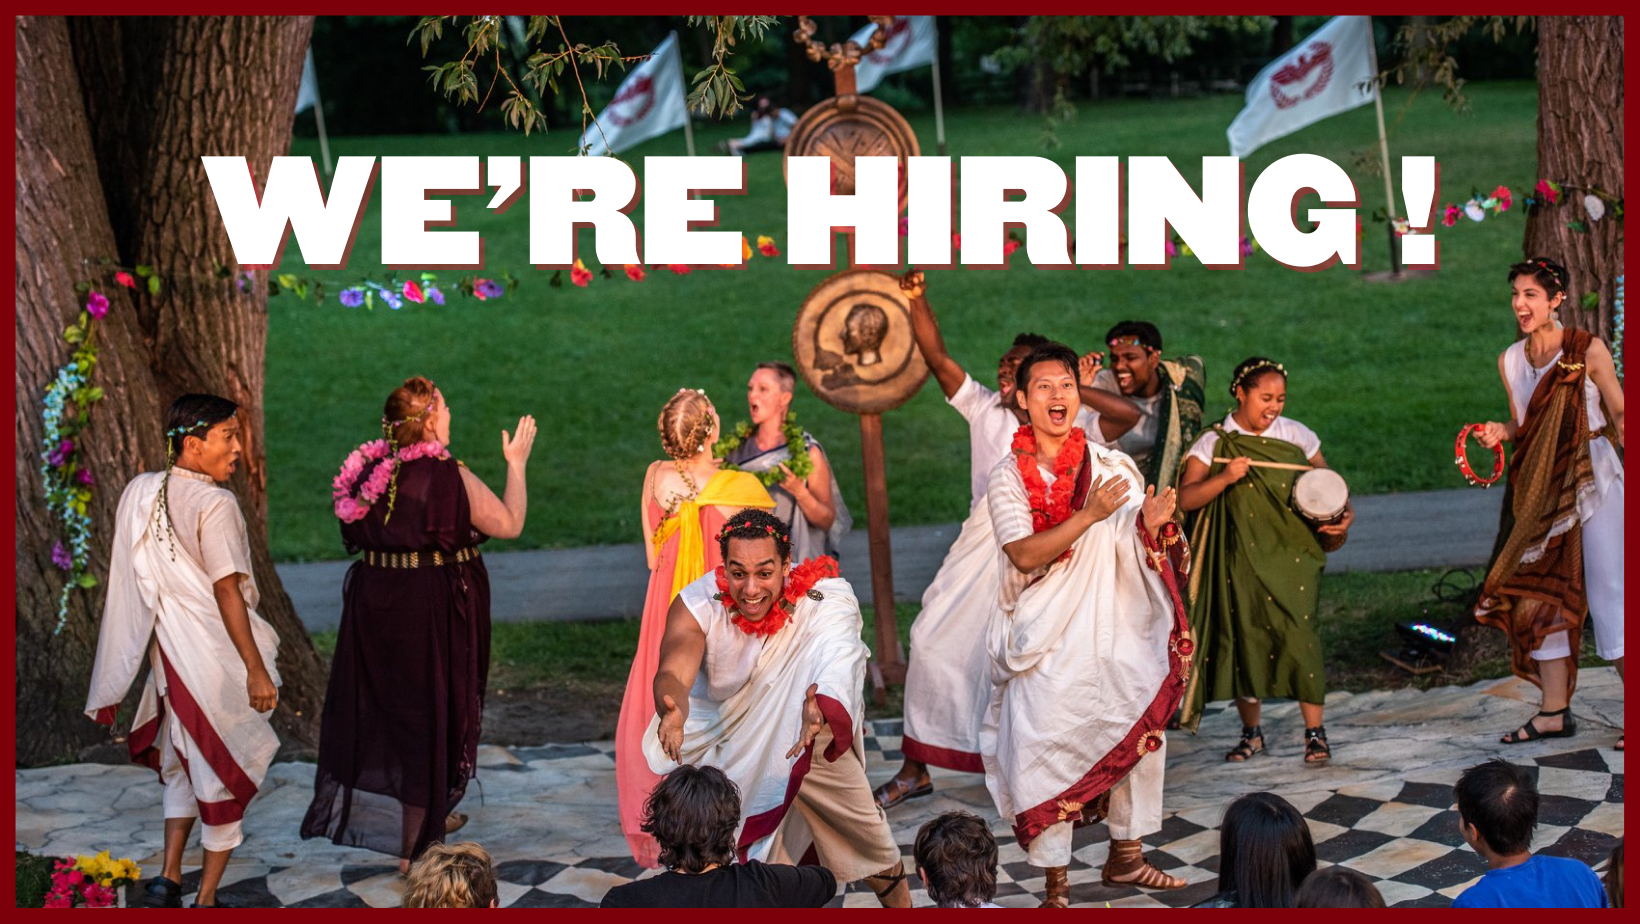 We're Hiring! in bold letter across the top. An image of a group of cheering actors in roman togas